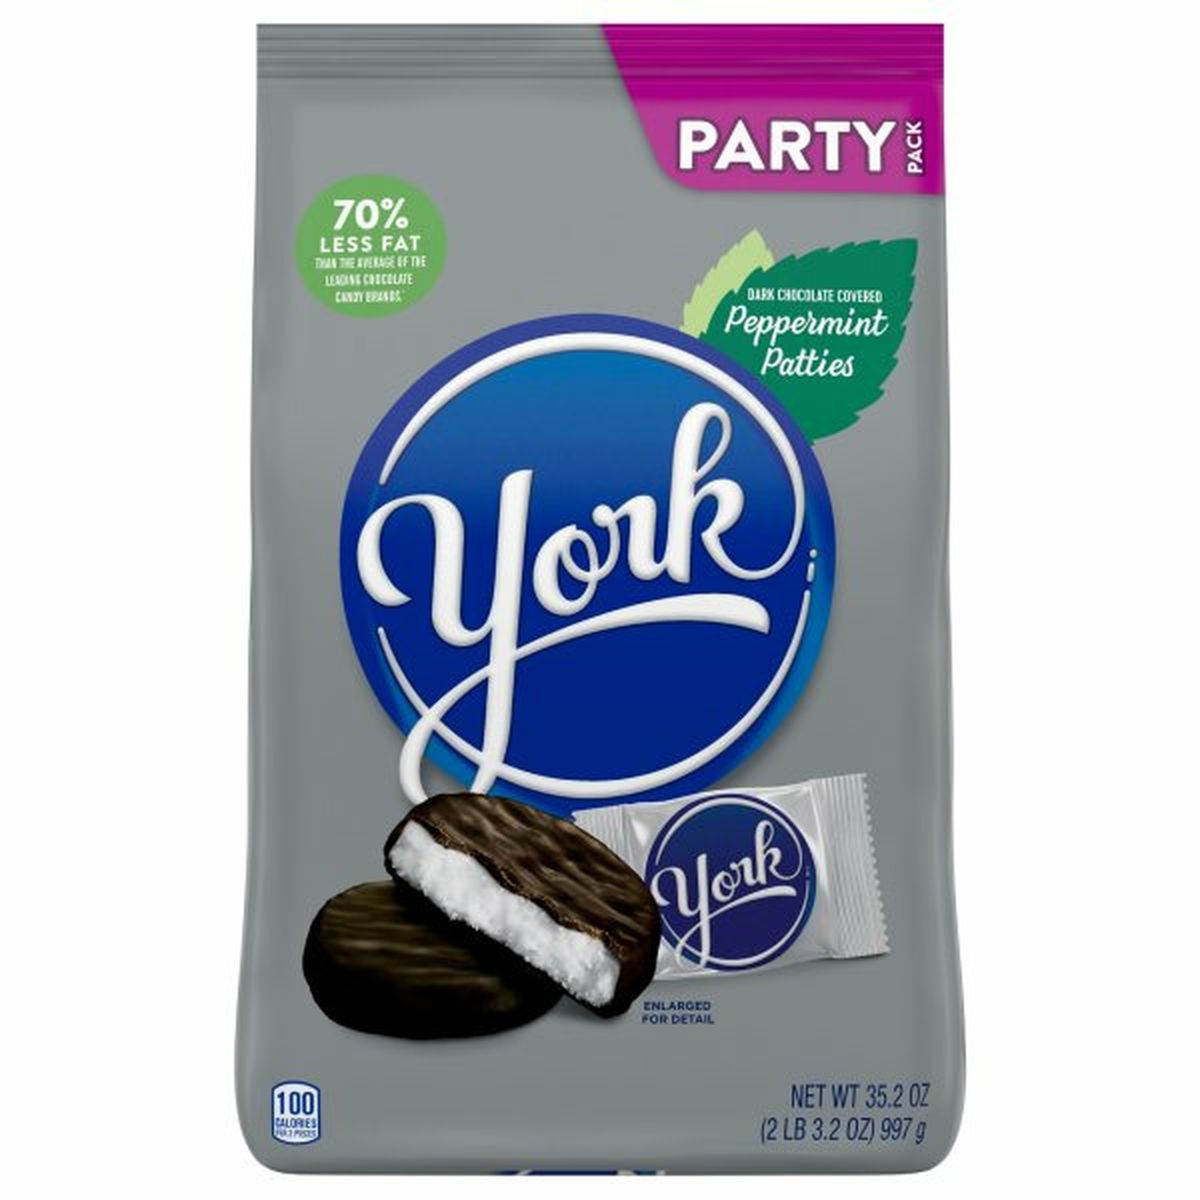 Calories in YORK Peppermint Patties, Dark Chocolate Covered, Party Pack